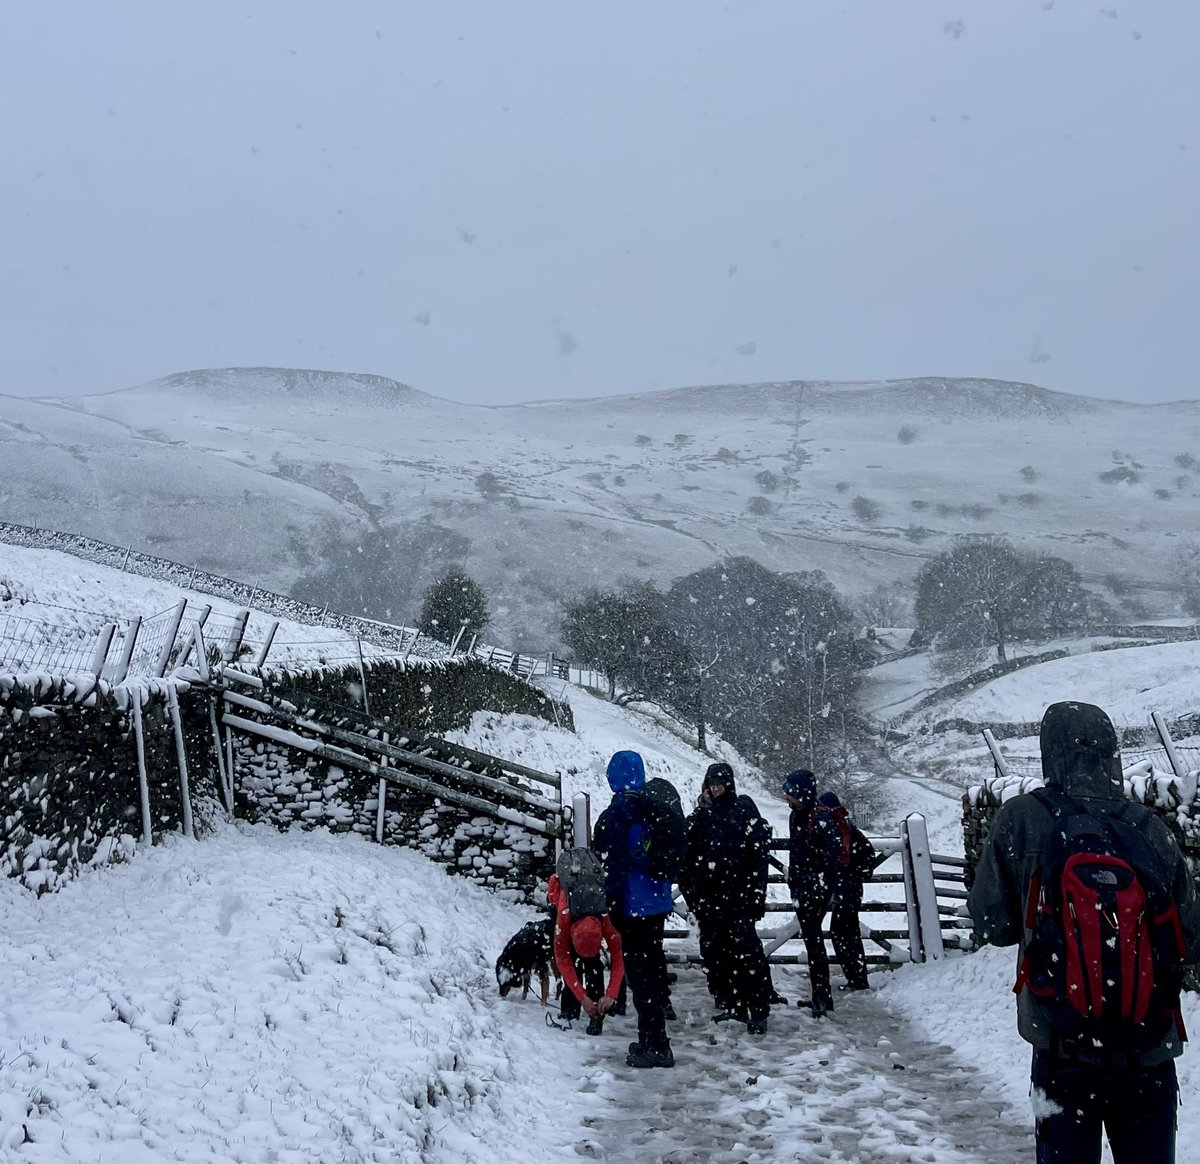 Snowy conditions and tough on the legs but a cracking @freshwalks as always!